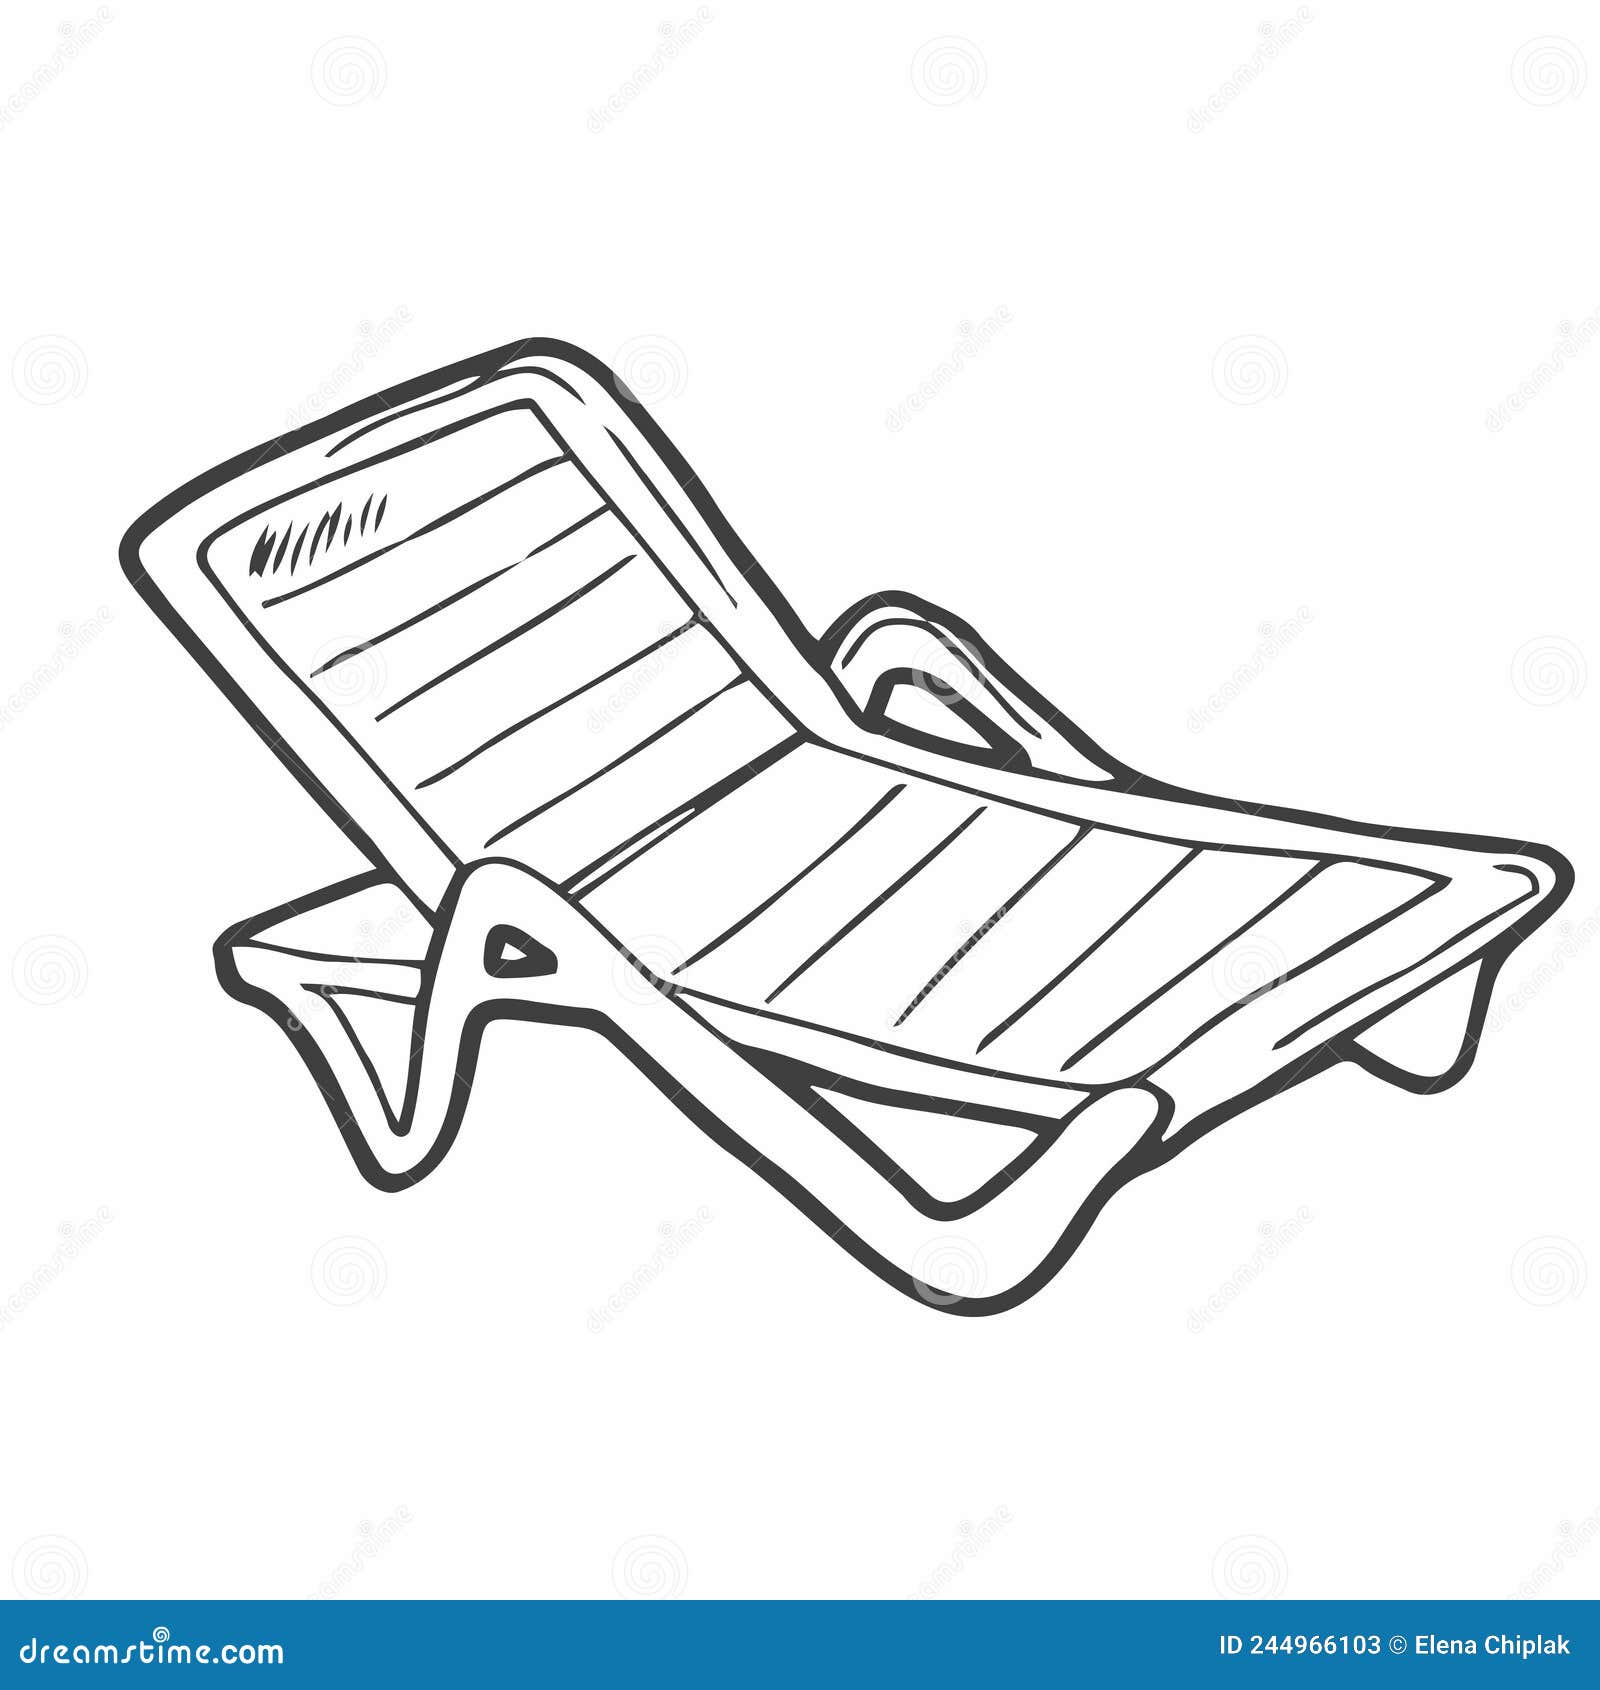 Doodle Hand Drawn Beach Chair. Deck Chair Sketch in Vector Stock Vector ...